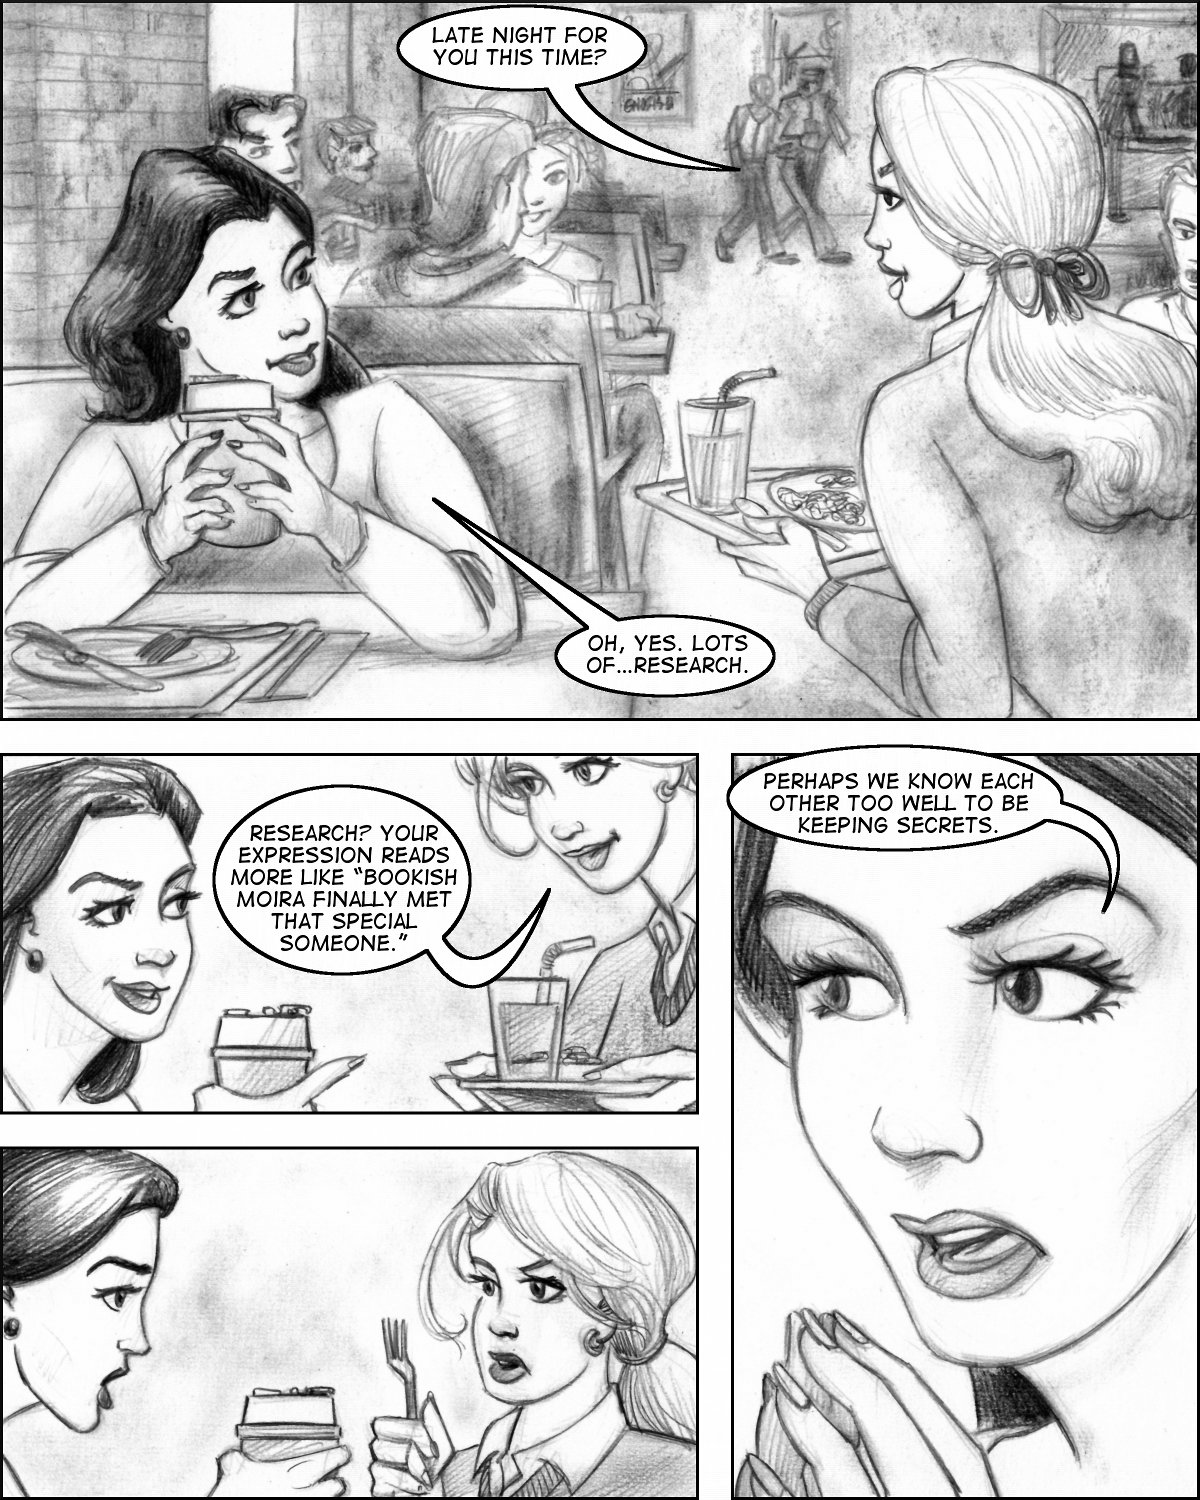 Moira and Nanetta meet each other at breakfast, and things get serious.